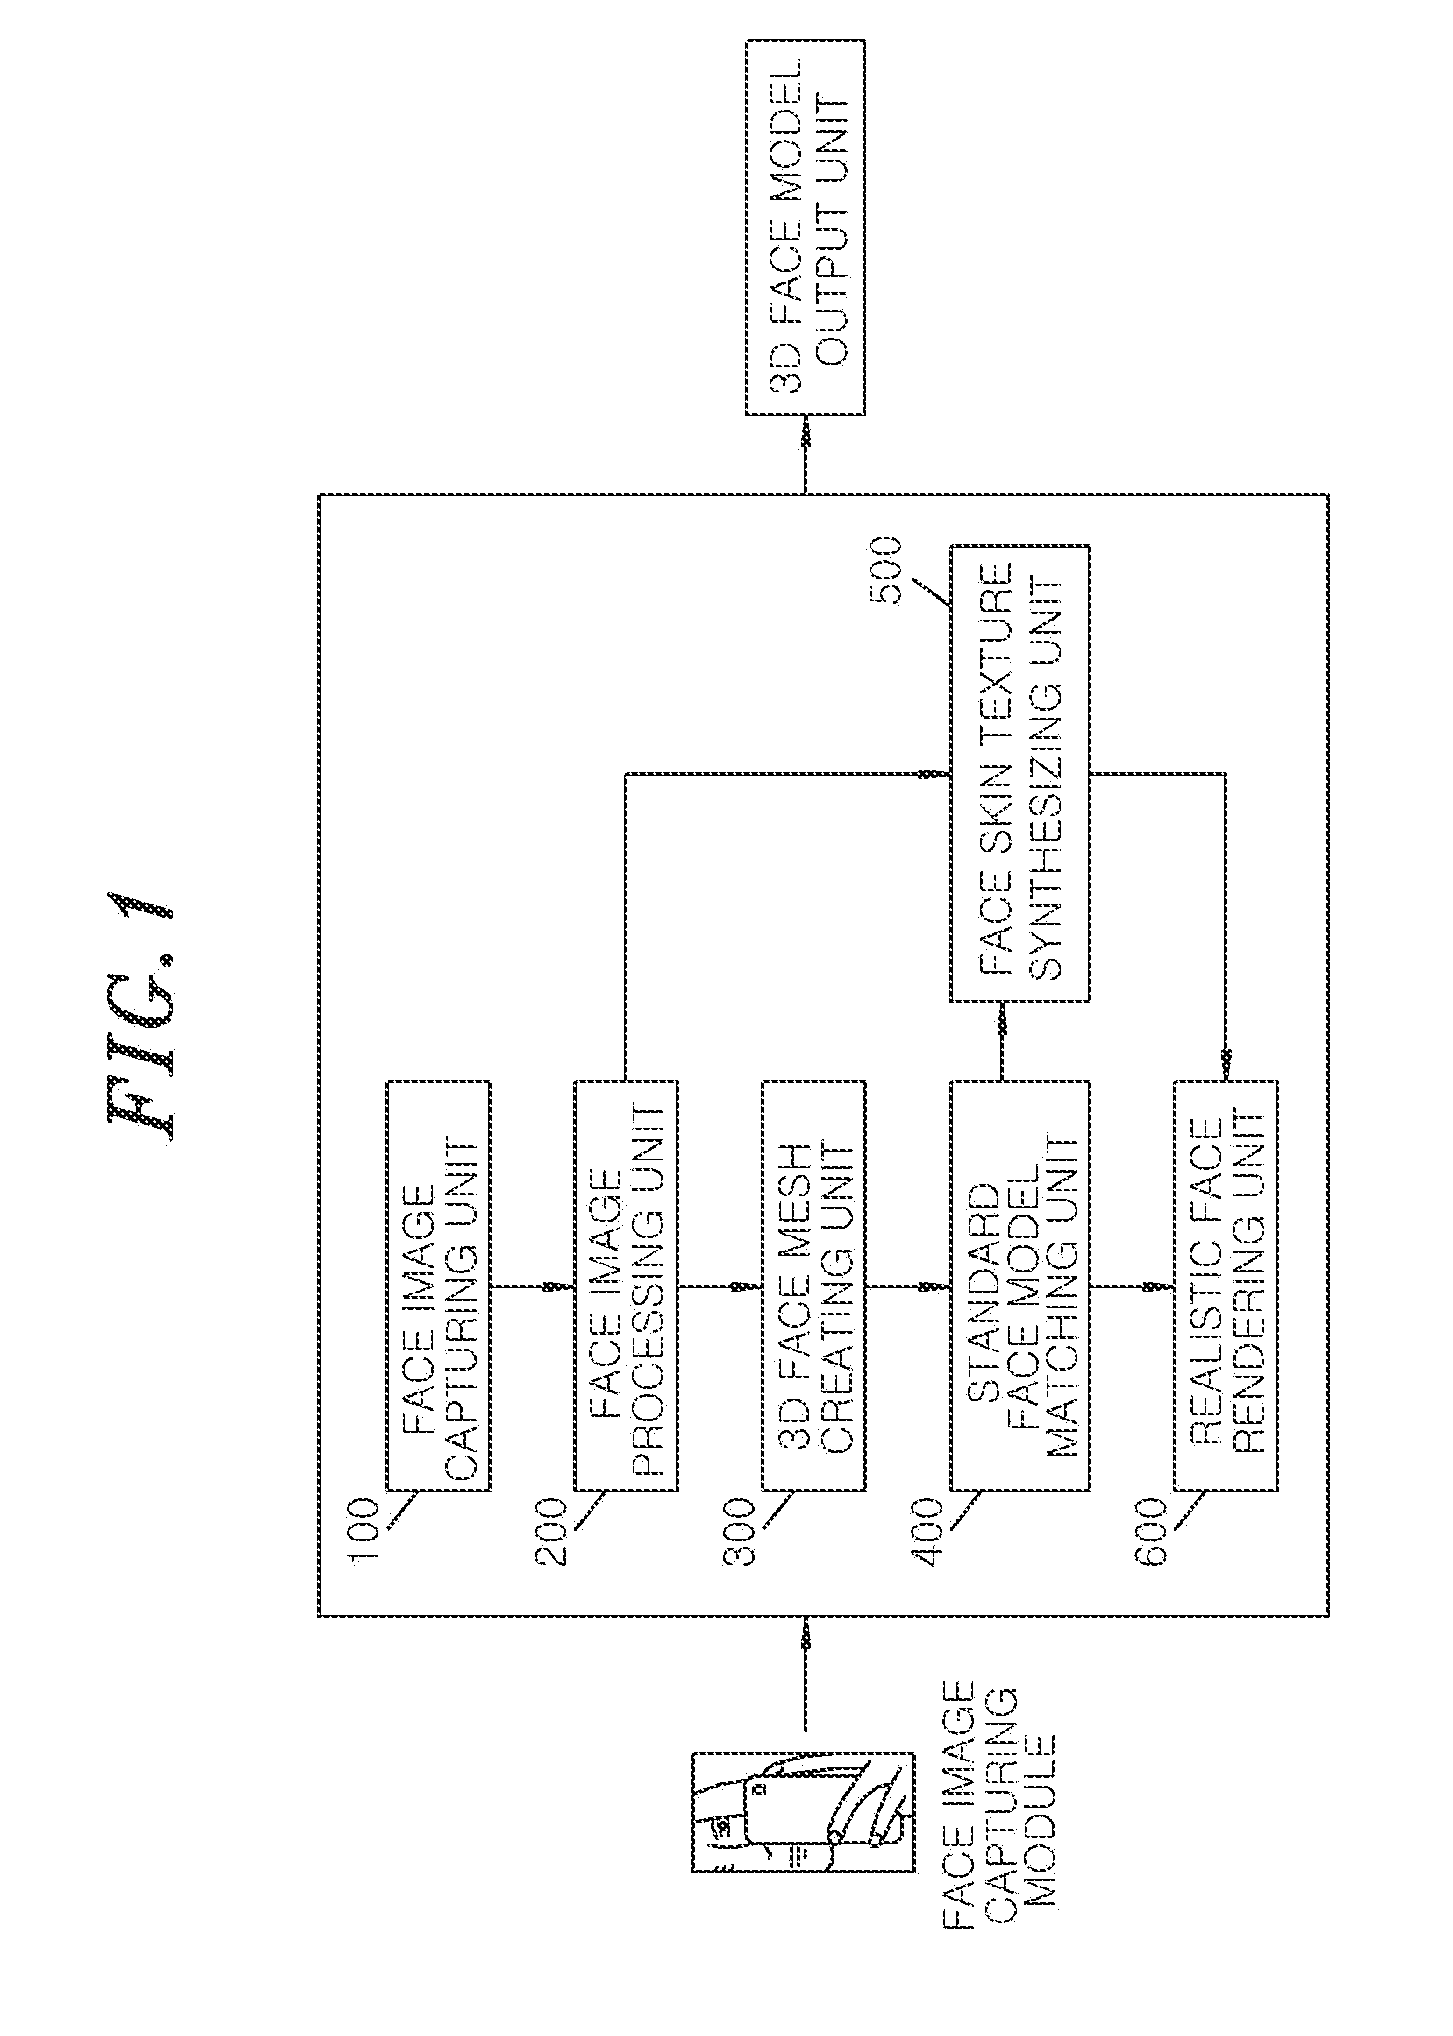 Method and apparatus for obtaining 3D face model using portable camera